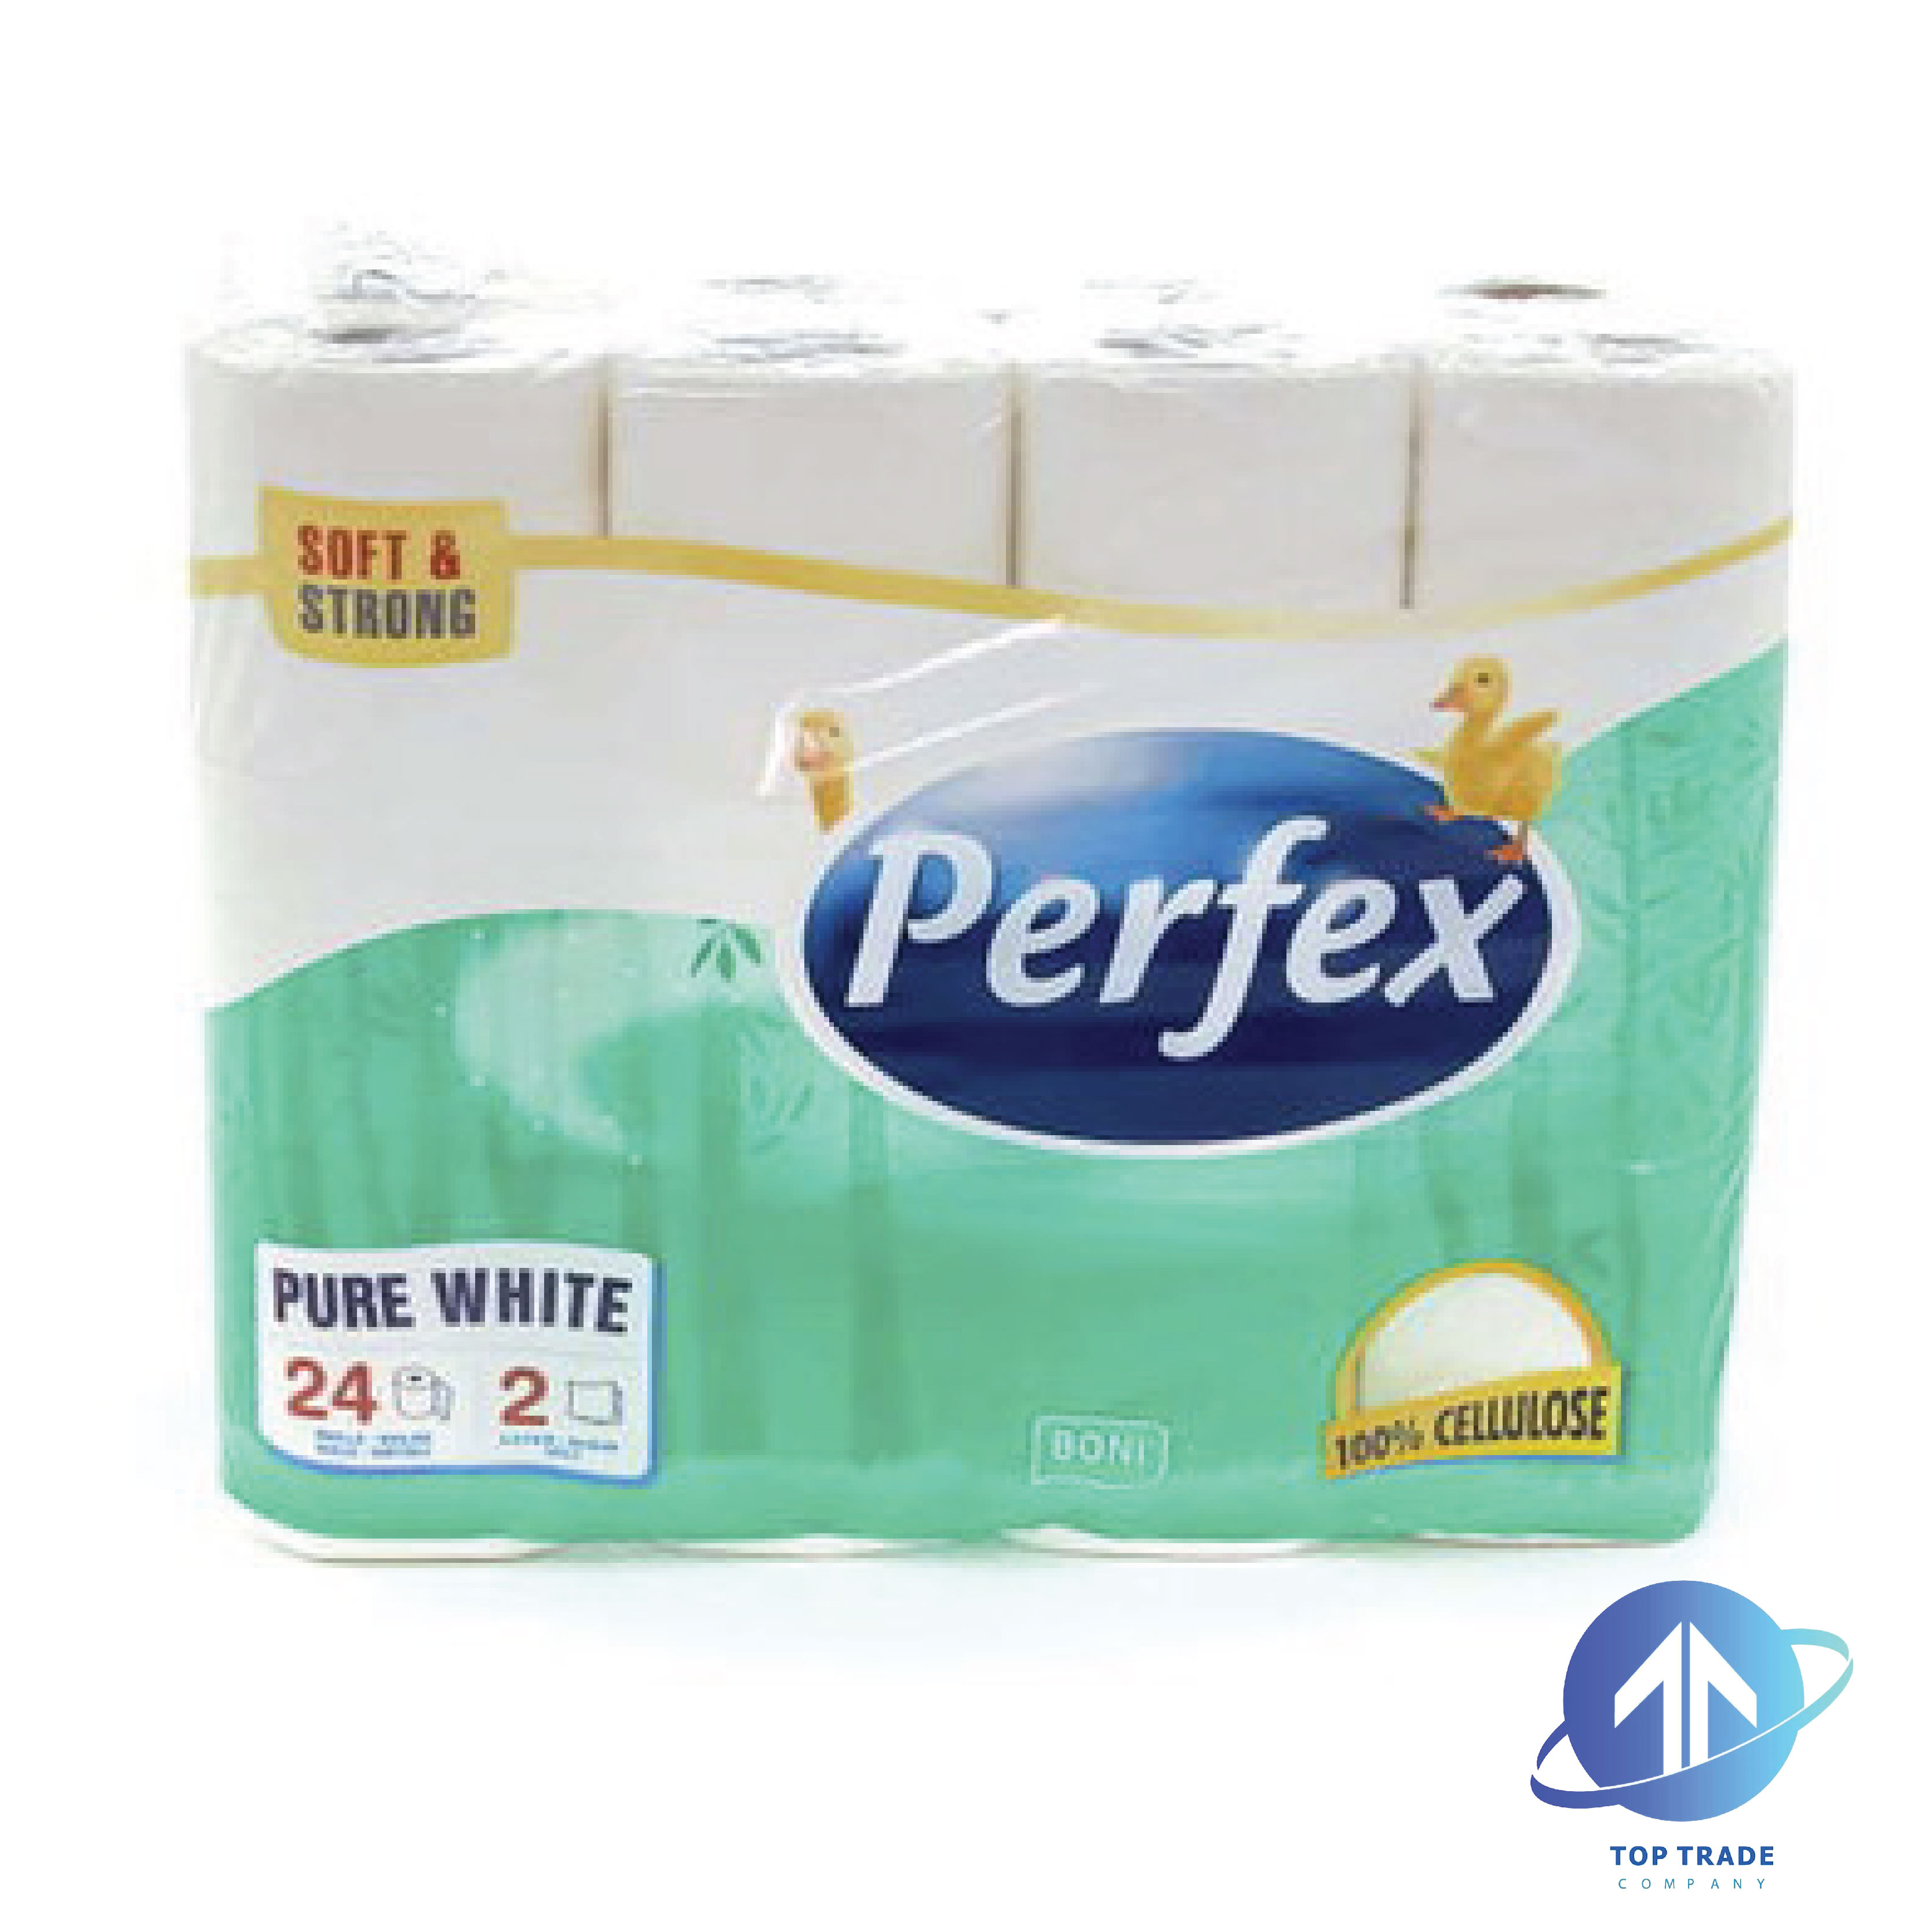 Perfex toilet paper 24 rolls 2 layers Soft & Strong